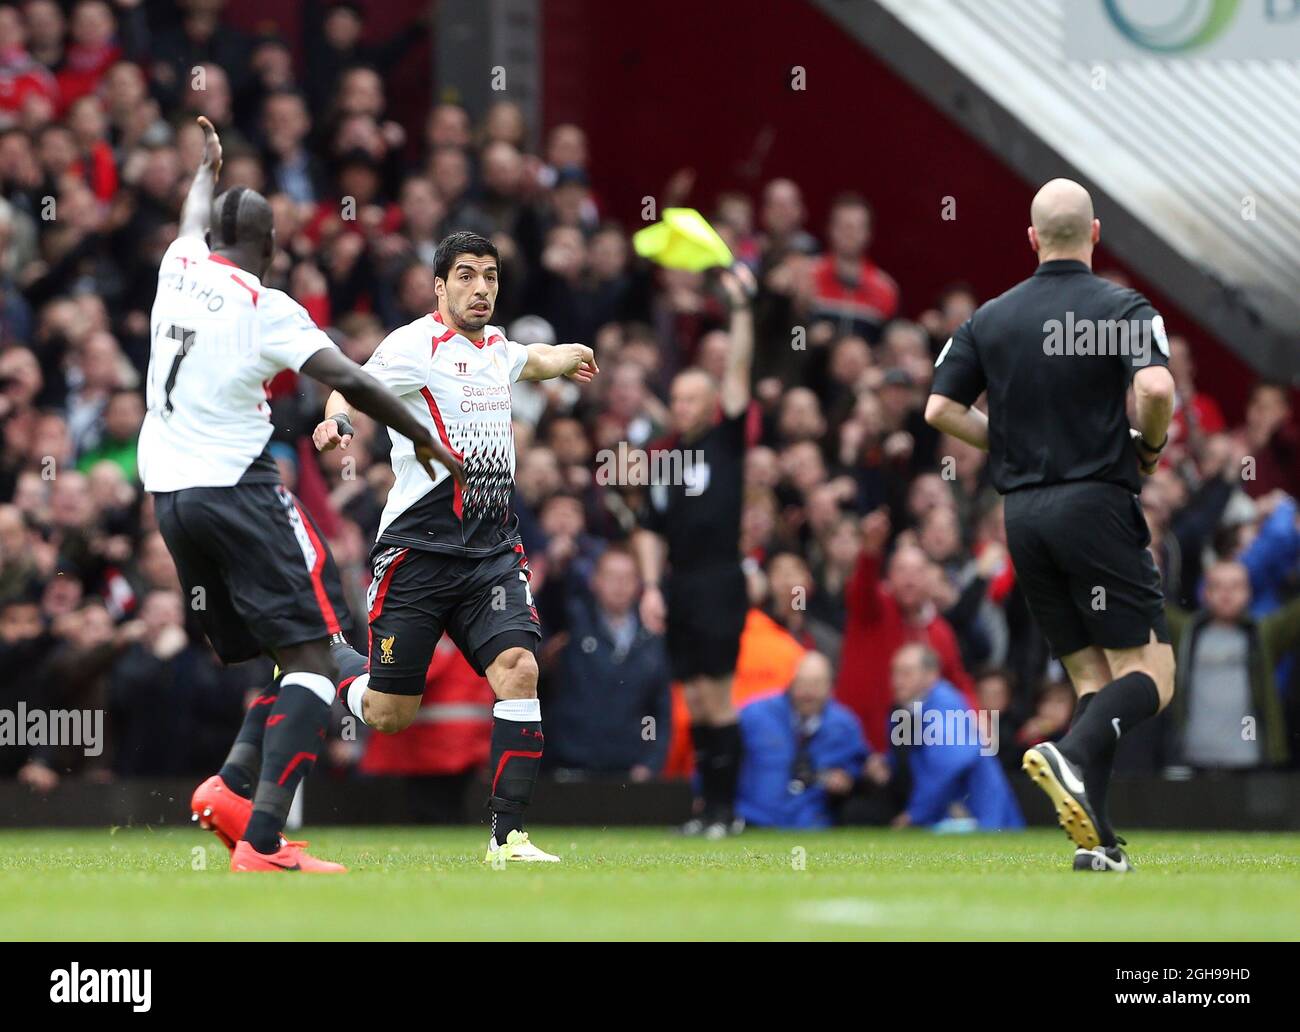 Liverpool's Luis Suarez complains about the award of West Ham's Guy Demel's goal during the Barclays Premier League match between West Ham United and Liverpool held at the Upton Park in London, England on April 6, 2014. Stock Photo